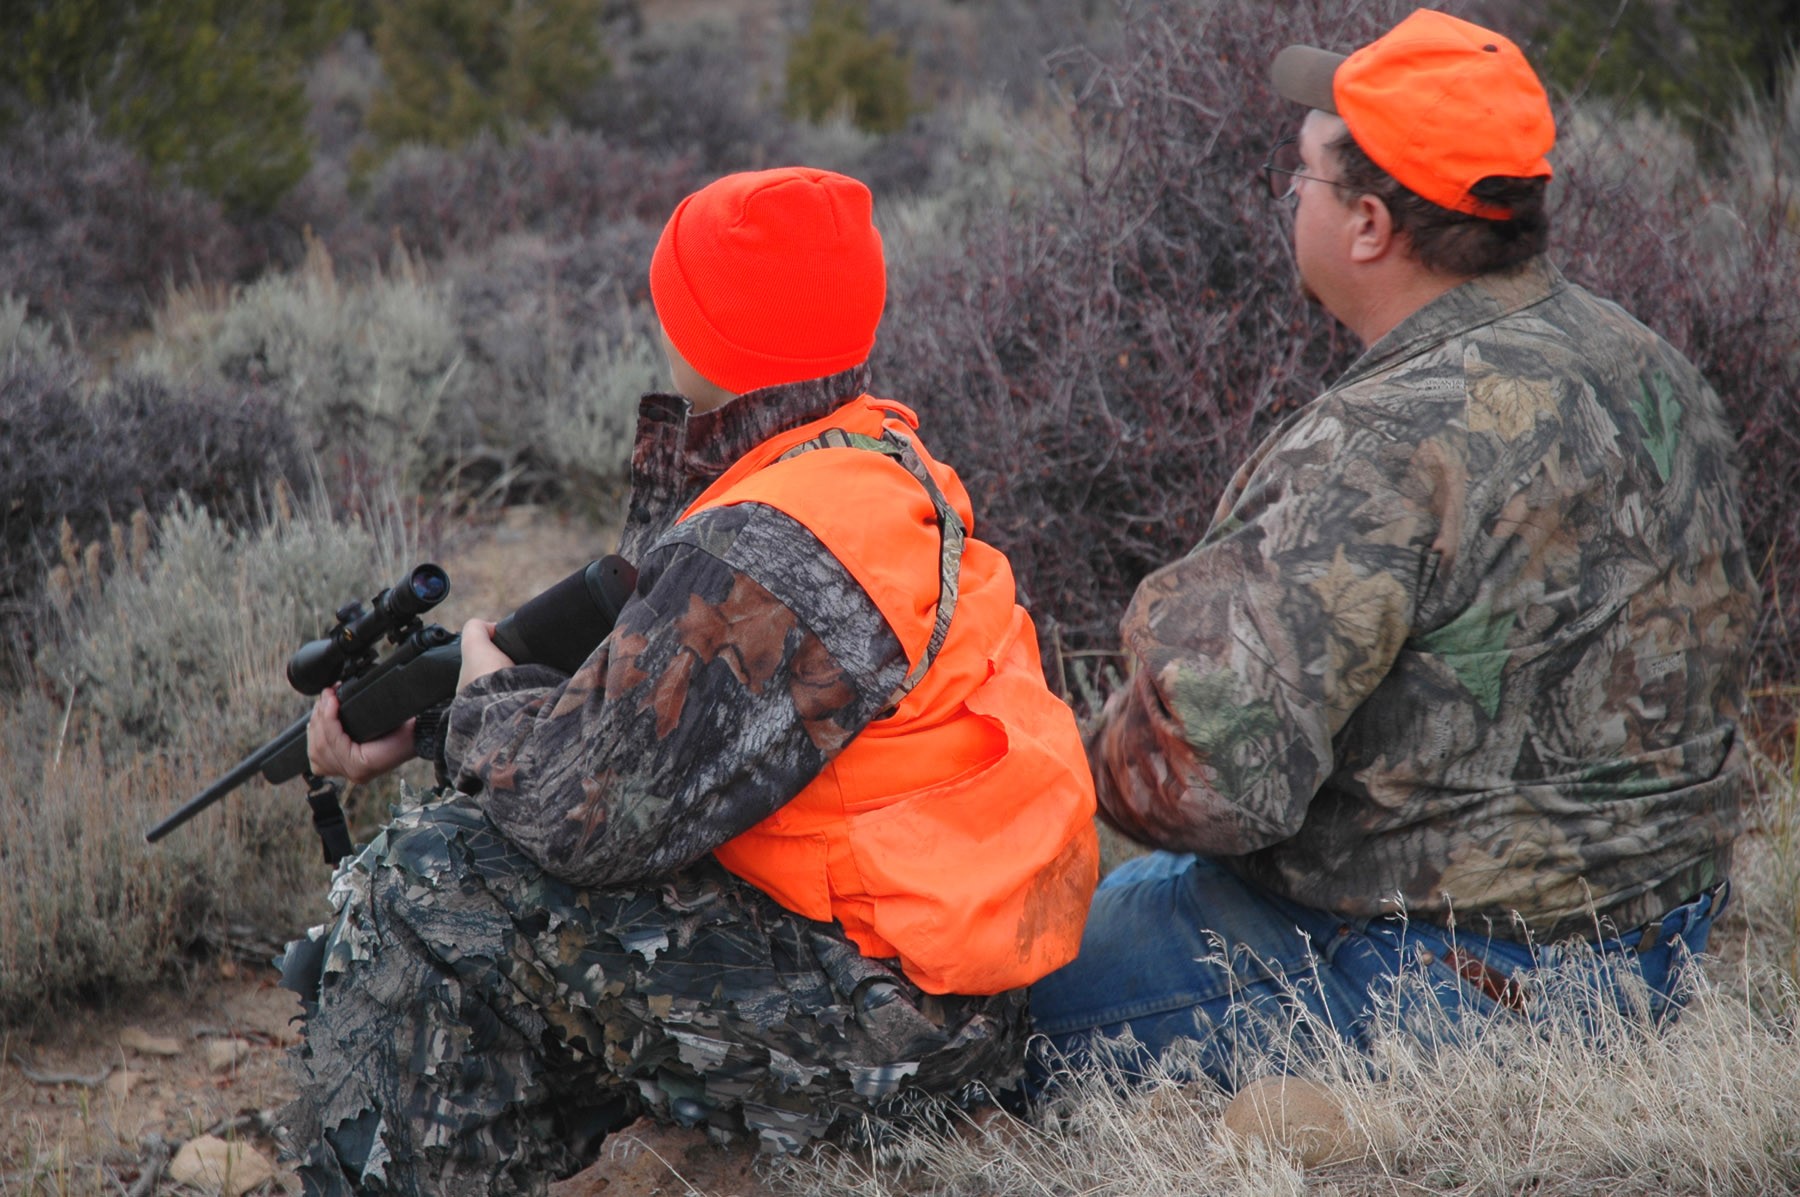 Two people sitting on the ground, holding hunting rifles, wearing camoflage clothing and orange high visibility hunting safety vests.